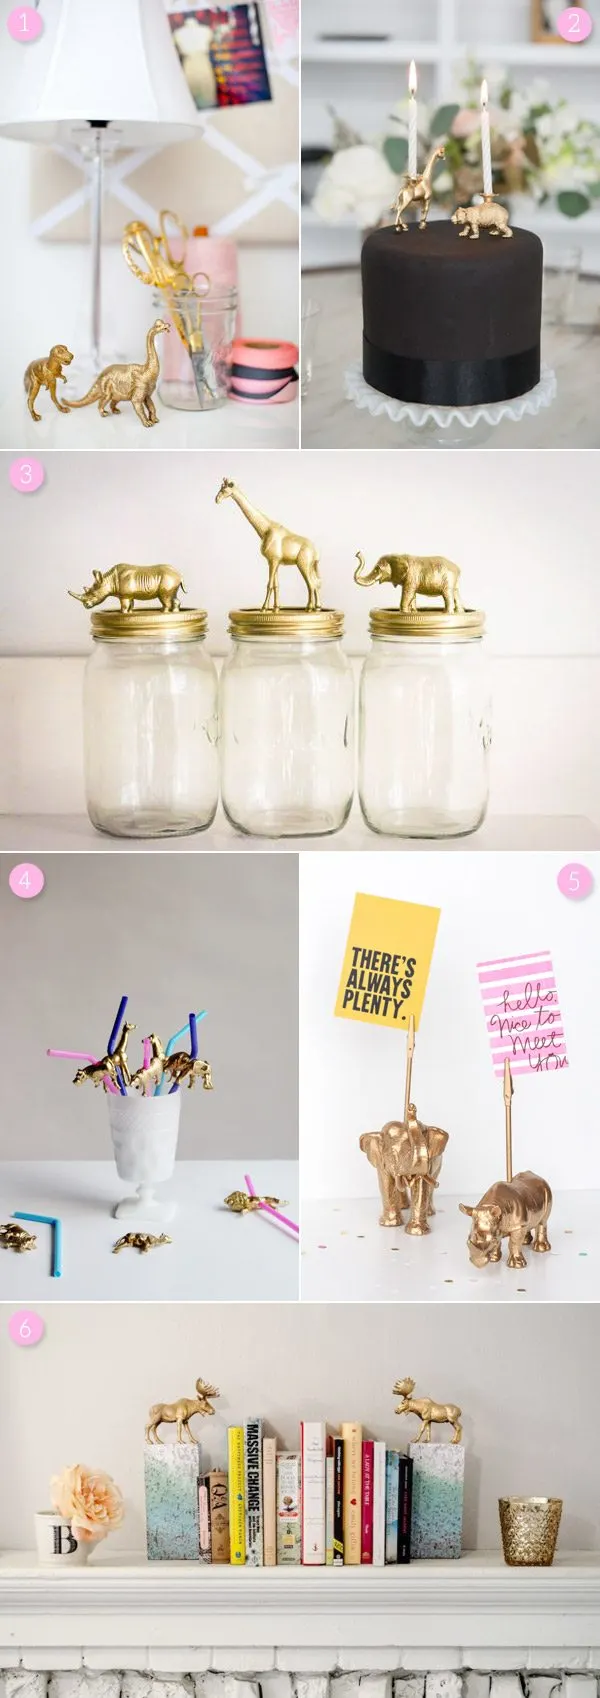 6 Awesome DIY Gold Animal Projects from @cydconverse